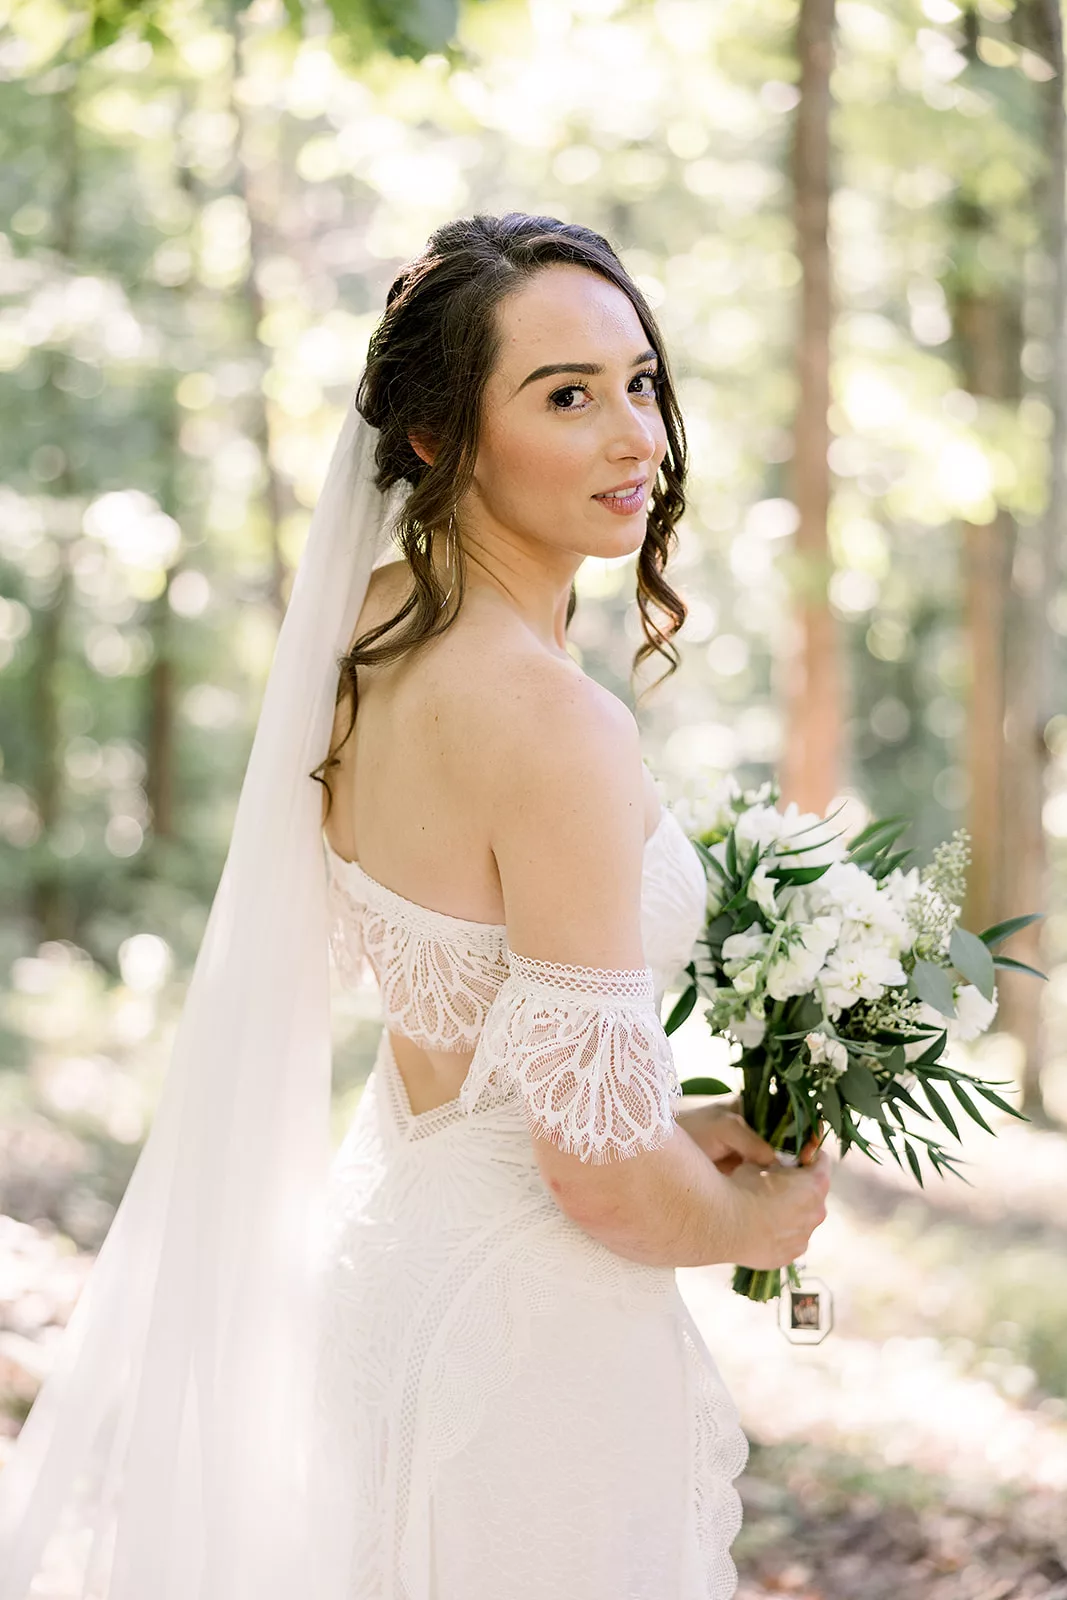 A bride smiles over her shoulder in a lace dress holding a white bouquet in a forest